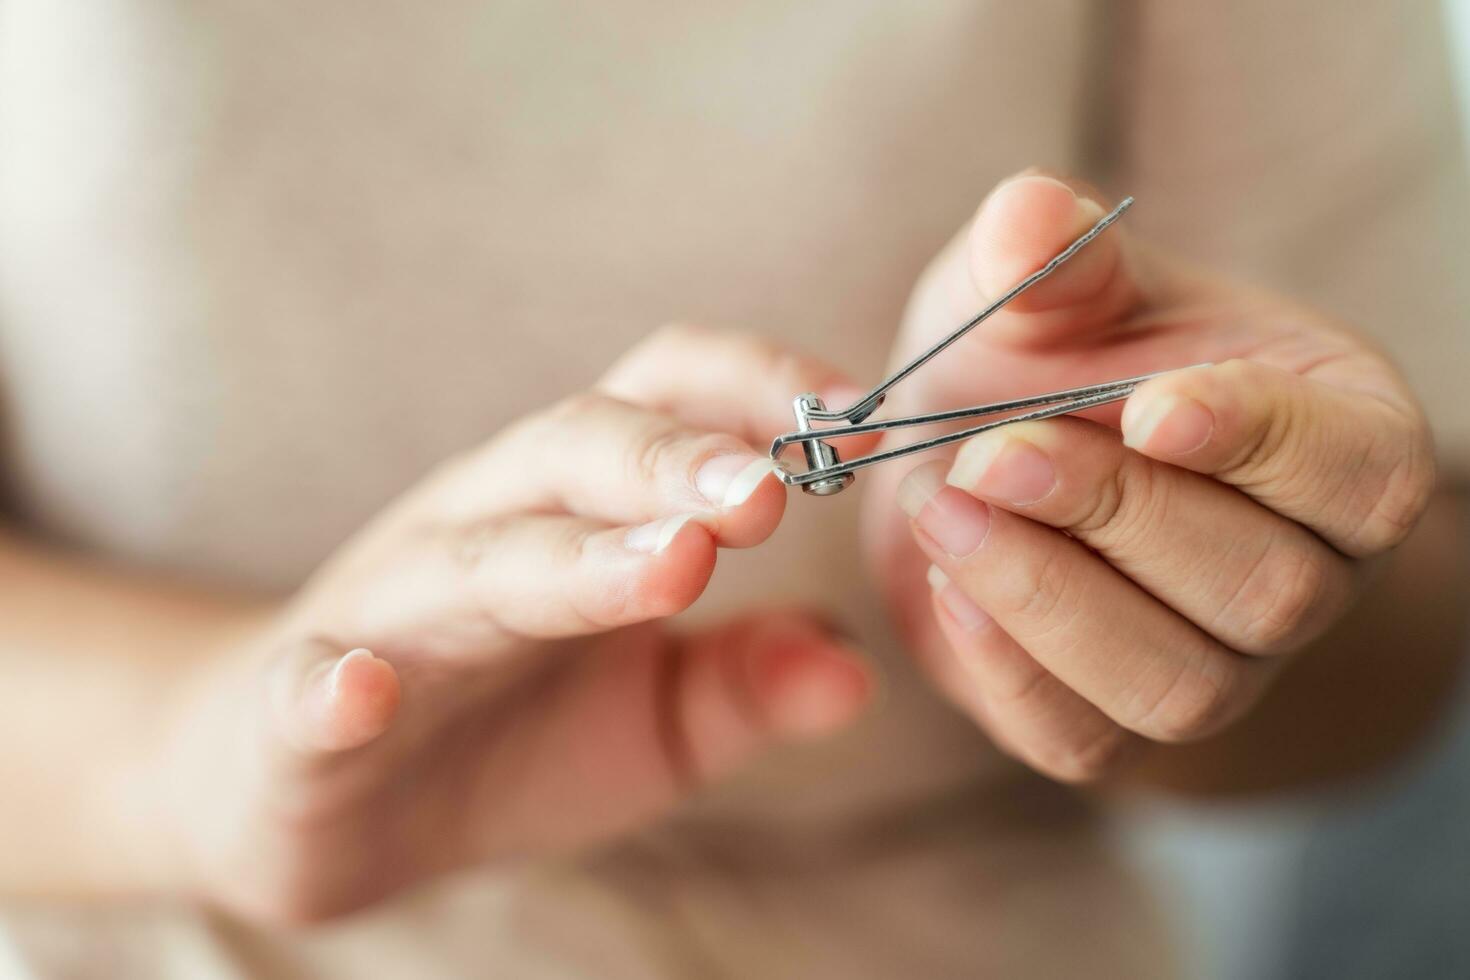 Woman cutting fingernails using nail clipper, Healthcare, Beauty Concept. photo